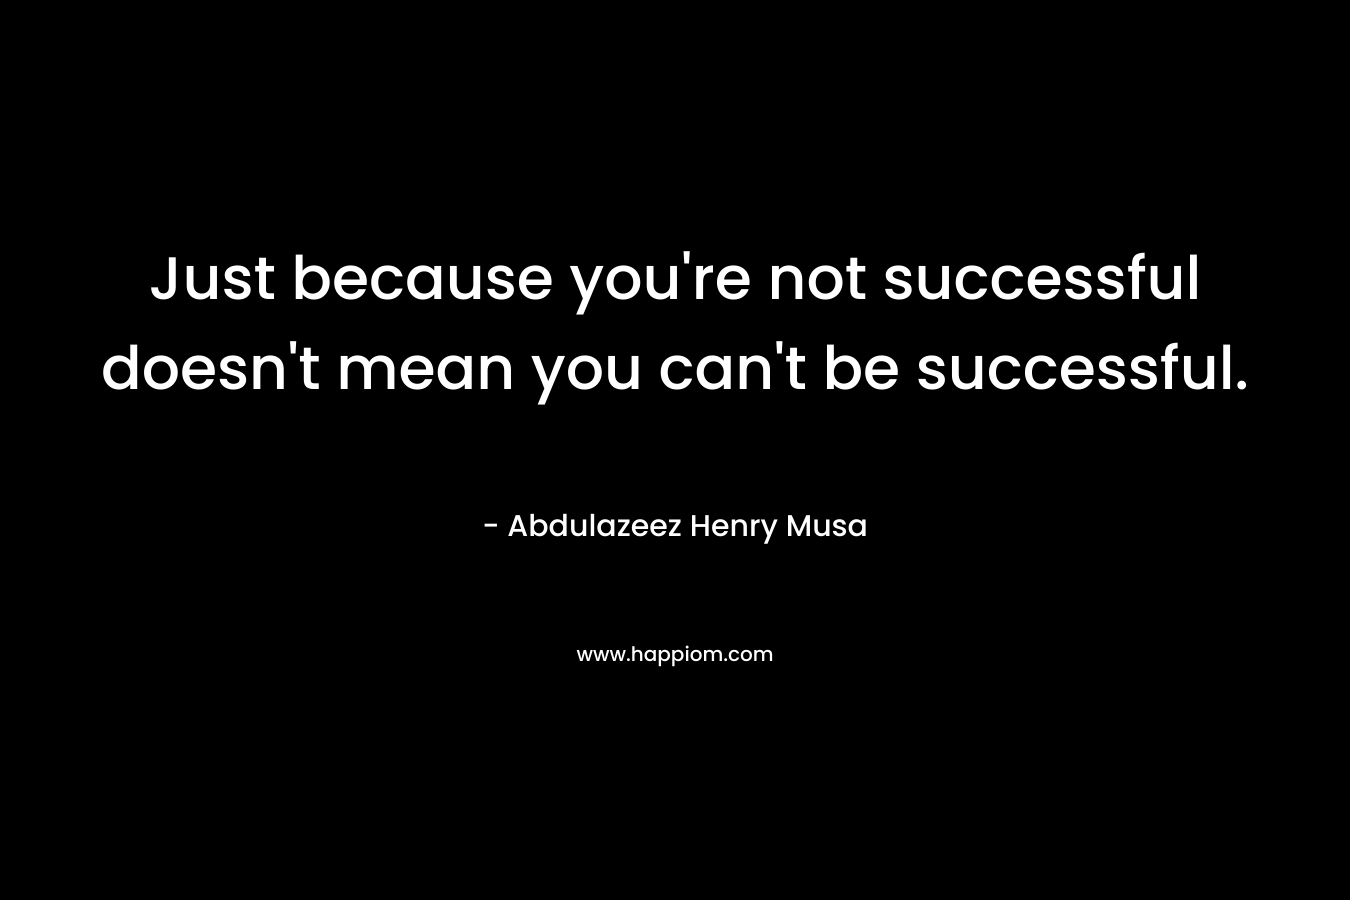 Just because you're not successful doesn't mean you can't be successful.